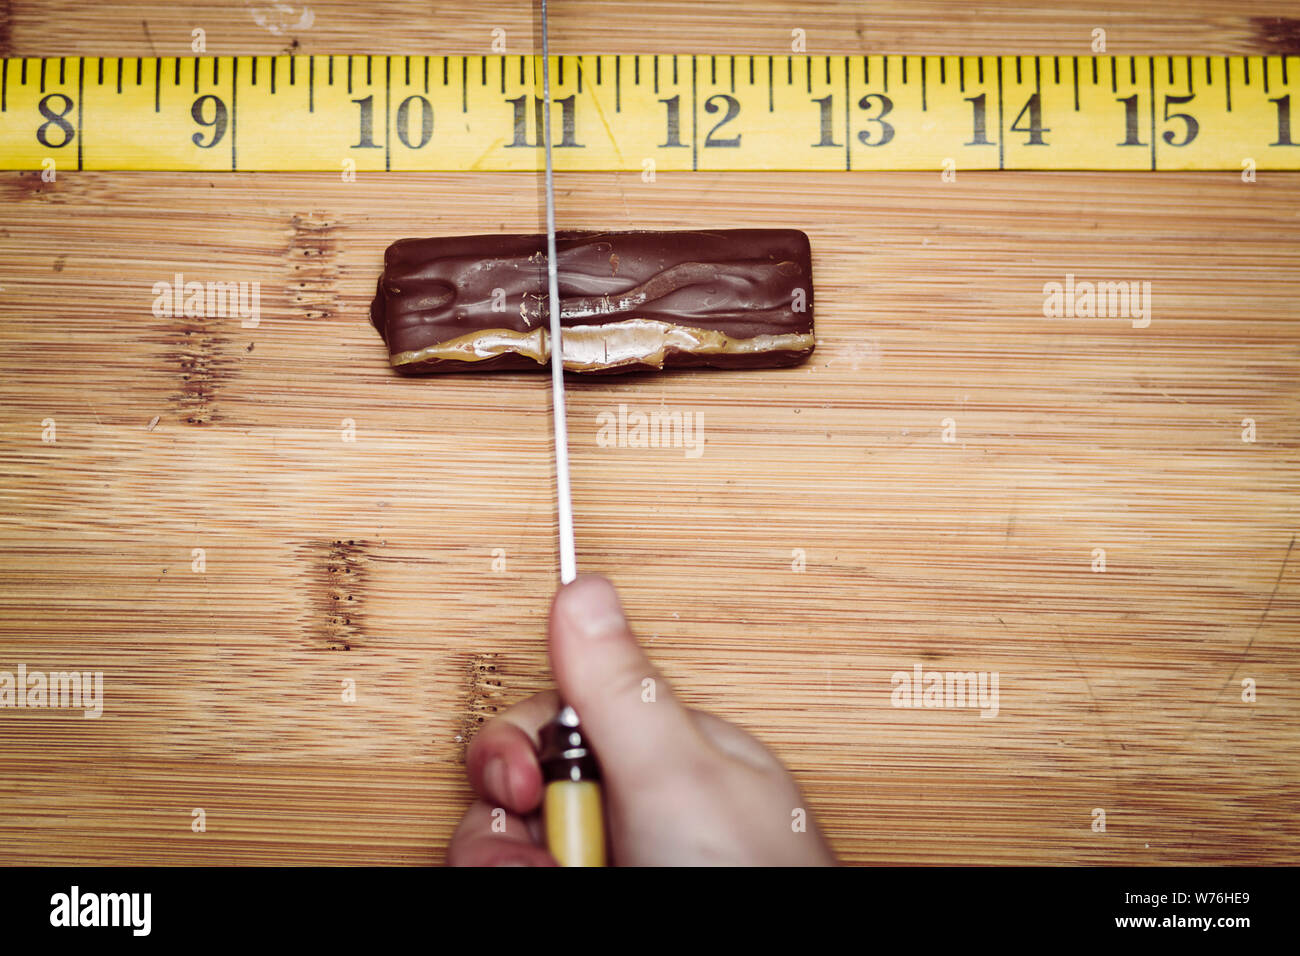 A chocolate bar being cut into exact equal portions. Stock Photo